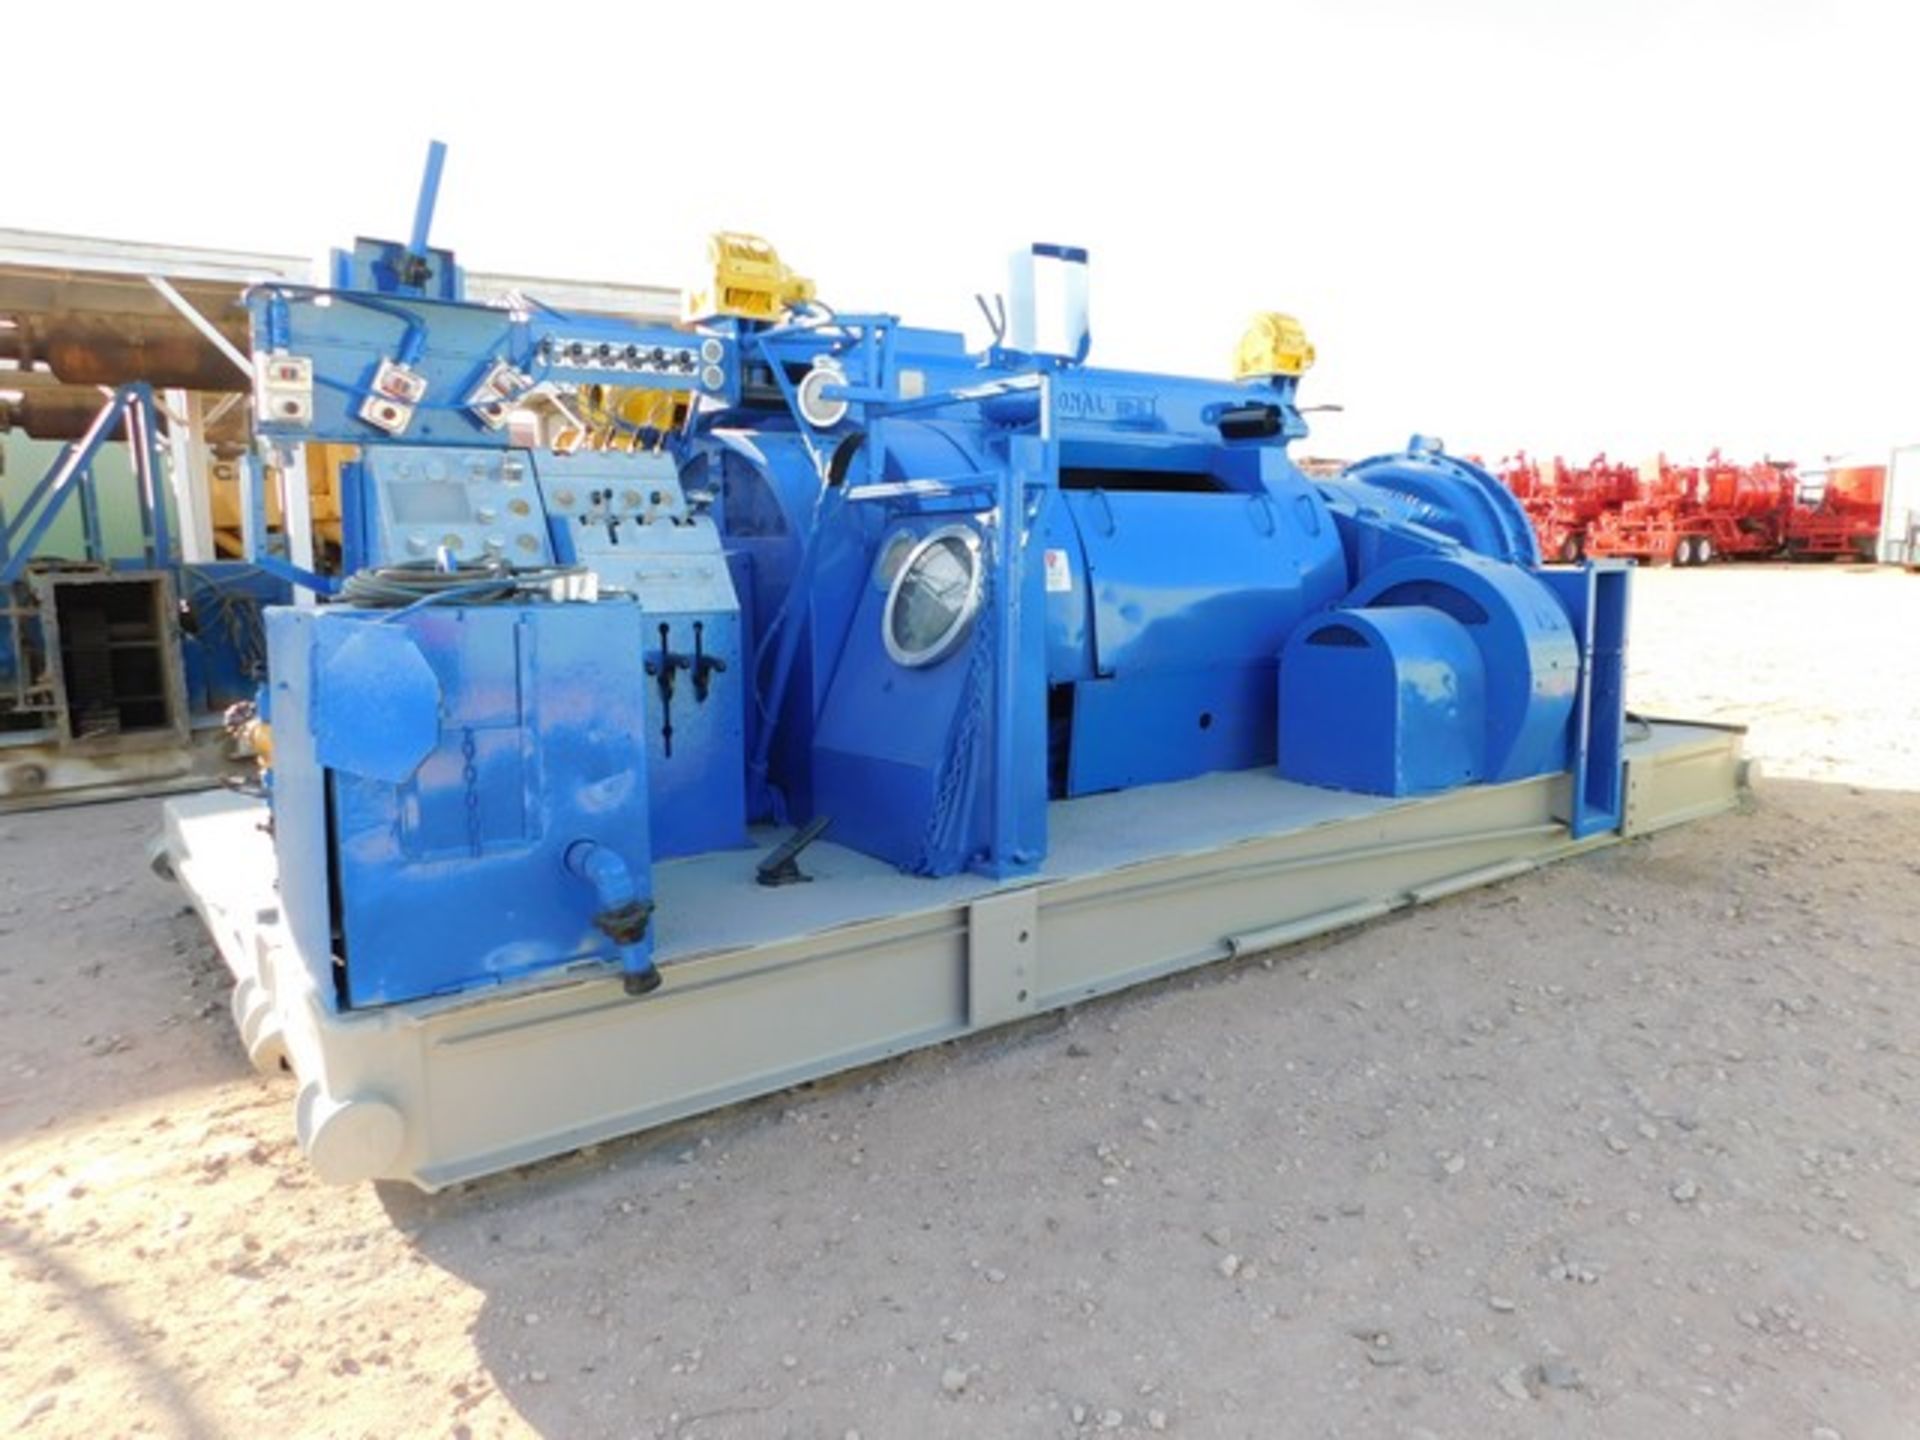 Located in YARD 1 - Midland, TX NATIONAL 80B MECHANICAL S/A 1000HP DRAWWORKS, GROOVED F/ 1-1/4"